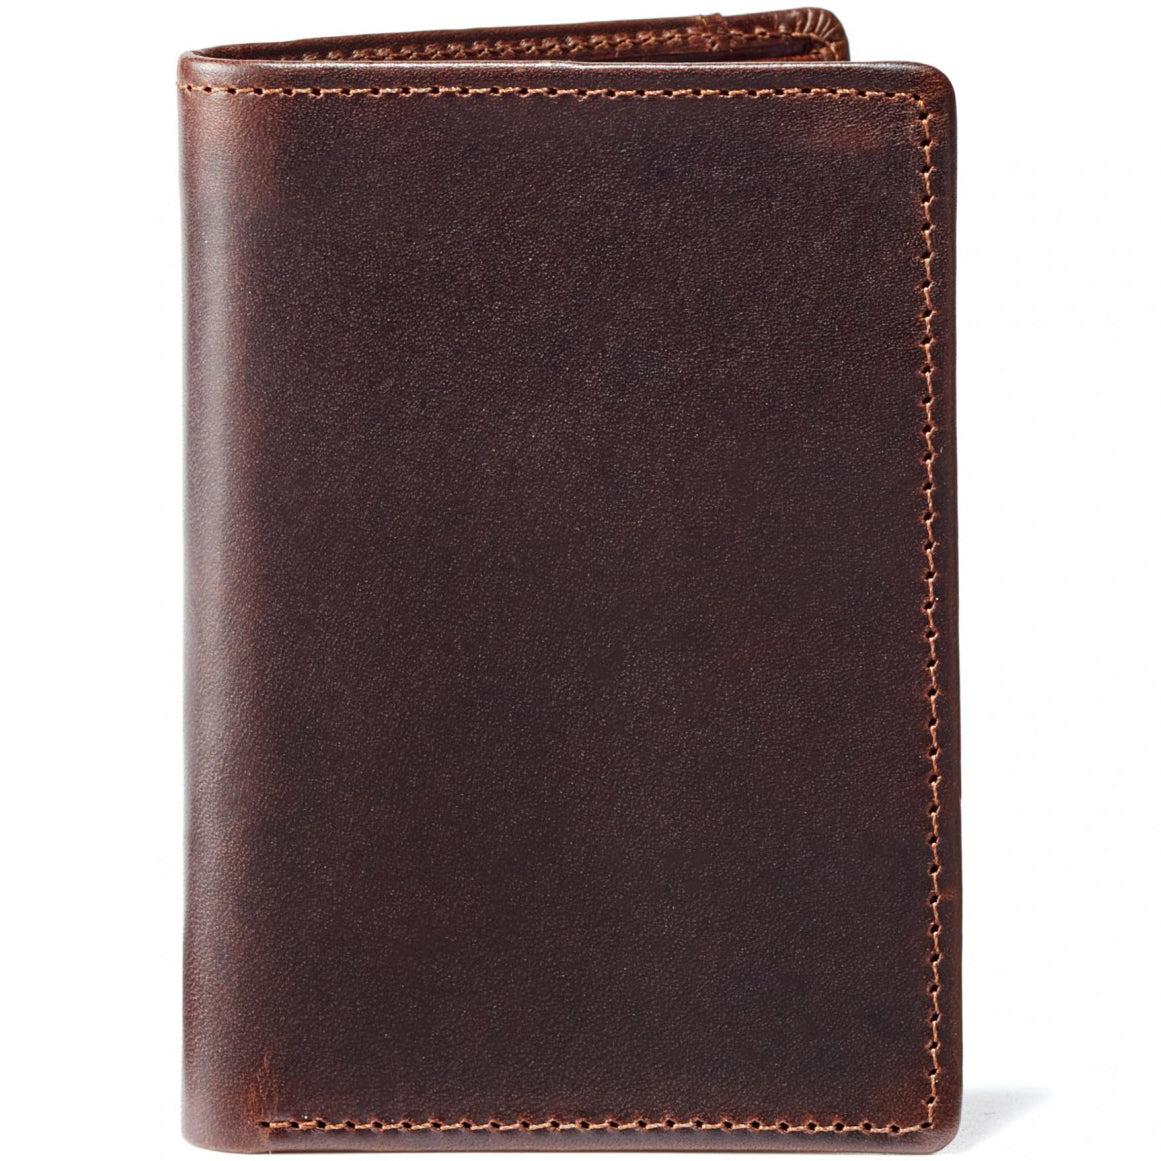 Moore and Giles Men's Wallet Brompton Brown Leather